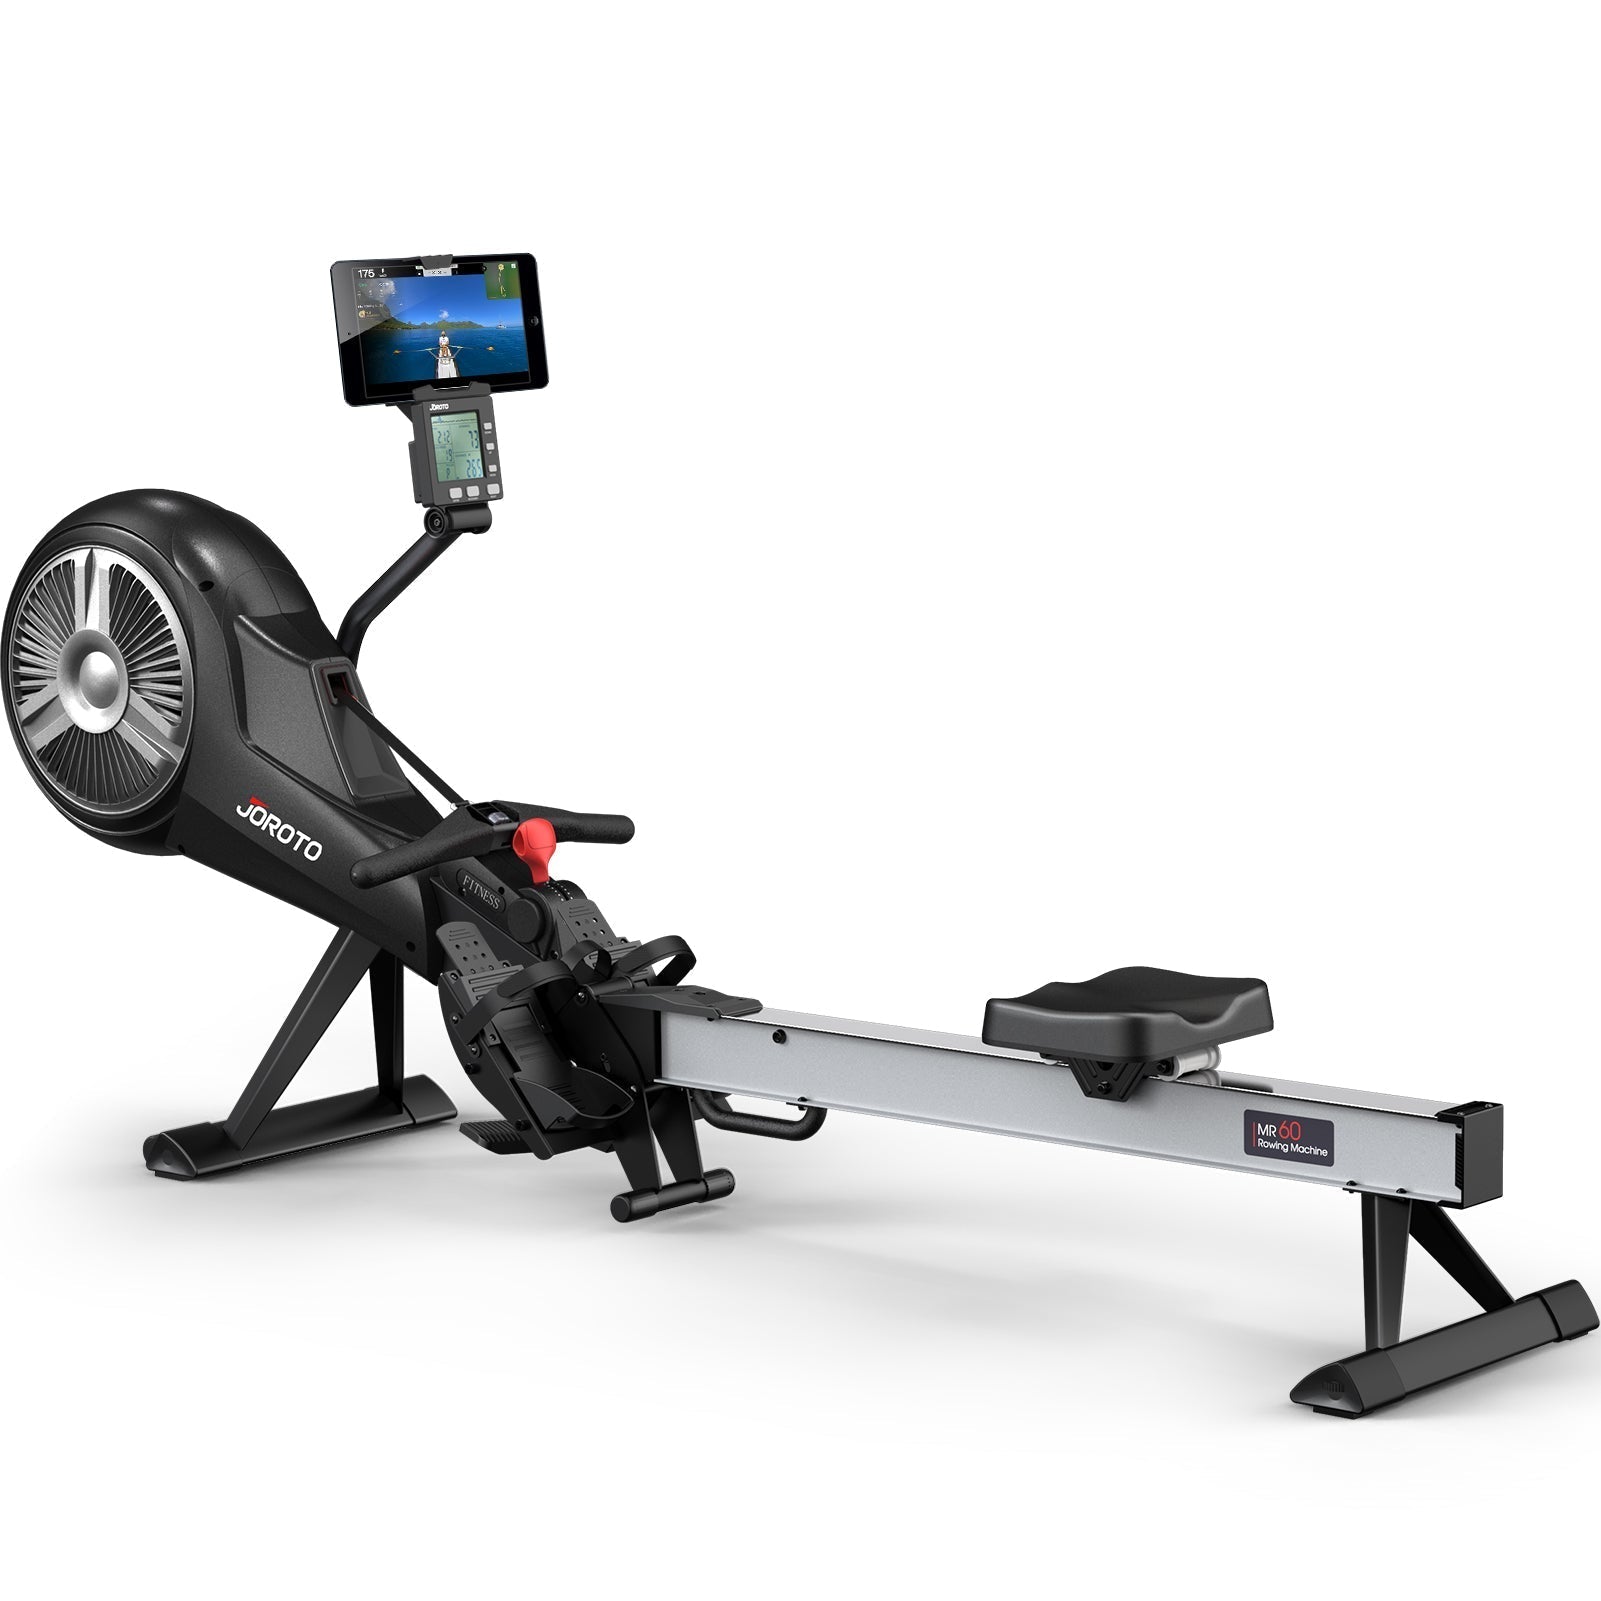 JOROTO Rowing Machine MR60 - Air & Magnetic Resistance Rowing Machines Support Bluetooth and Kinomap, Commercial Grade Rower Machine with Smart Backlit Monitor - jorotofitness